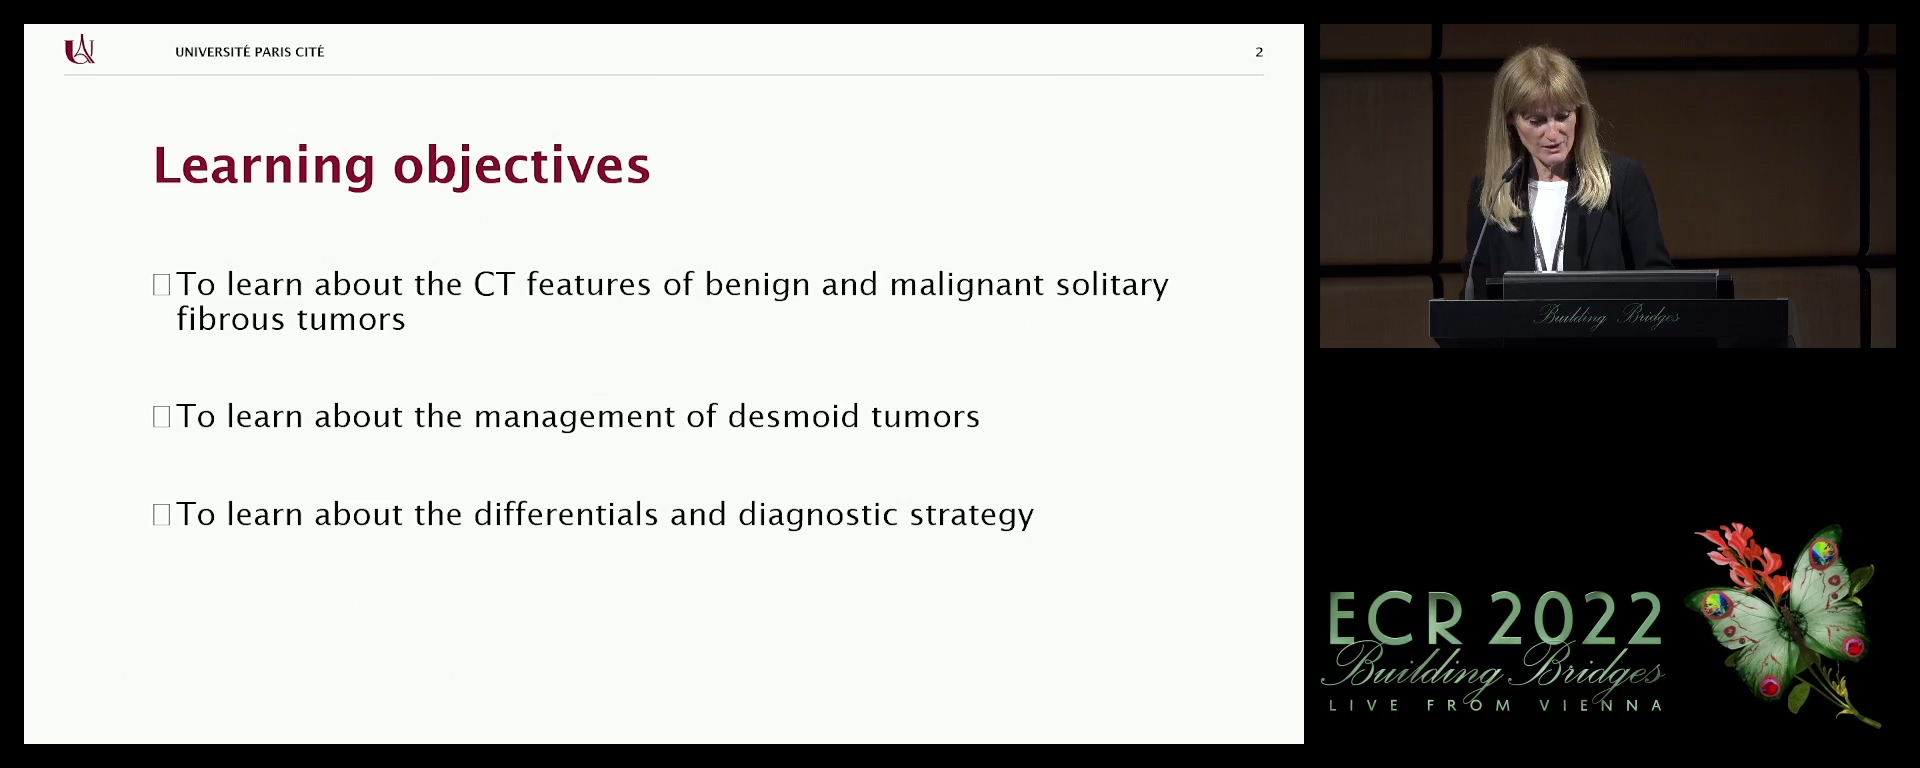 Less common pleural malignancies: how to recognise them on CT